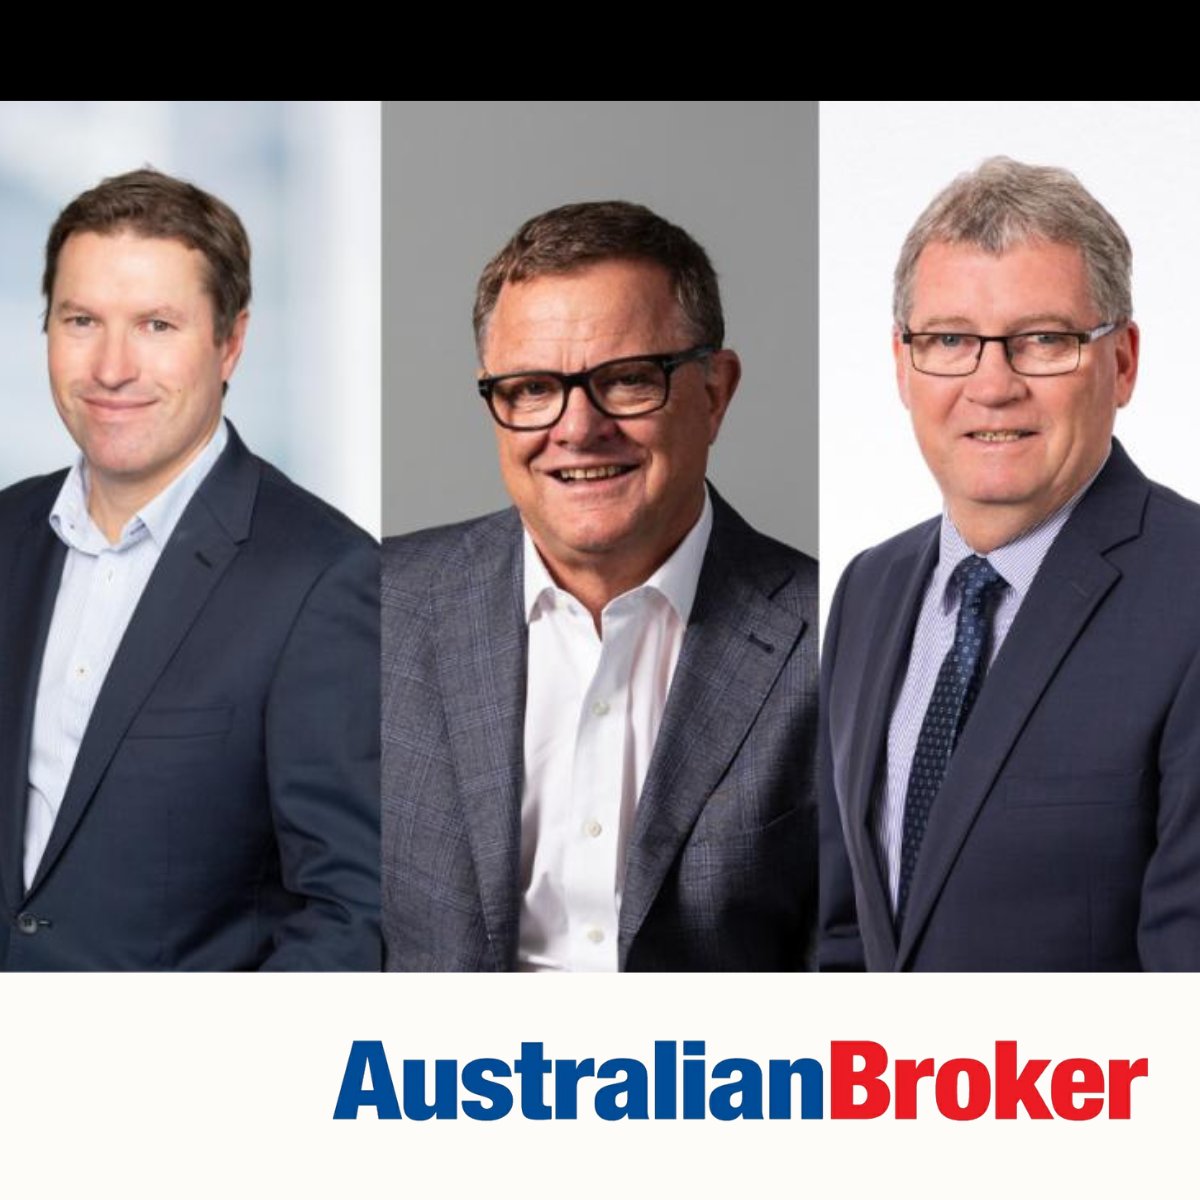 Australian #SMEs favour domestic suppliers, says ScotPac's SME #GrowthIndex.   ScotPac's Jon Sutton and Perry Finance's Cameron Perry & Geoff Fox discuss how lenders and brokers can add value. lnkd.in/g4FrQWJu